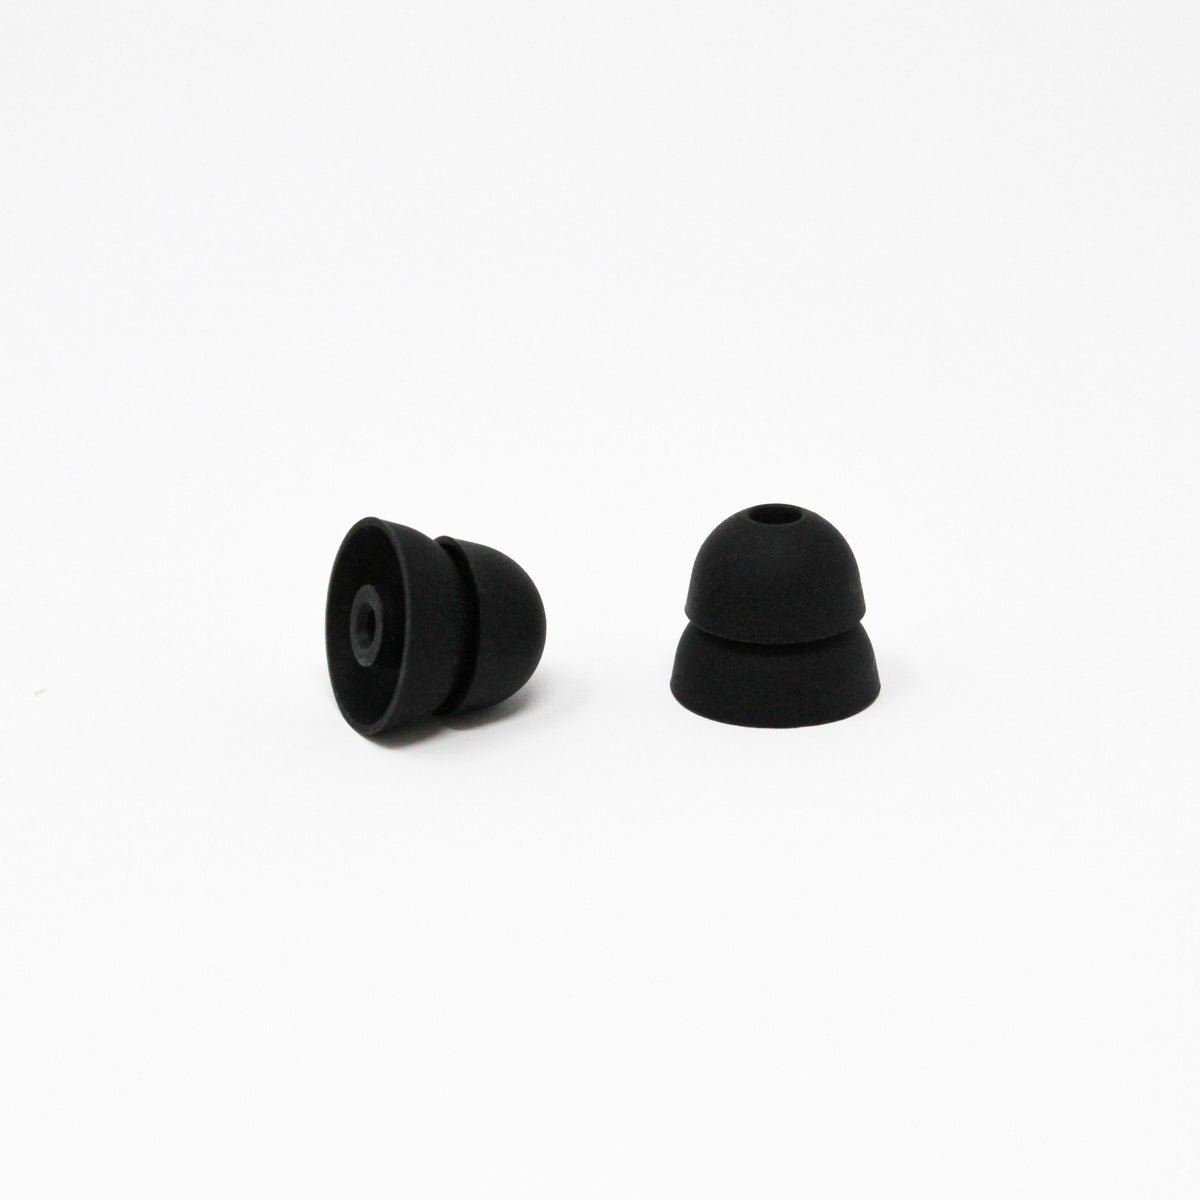 ISOtunes Large Double Flange Replacement Eartips